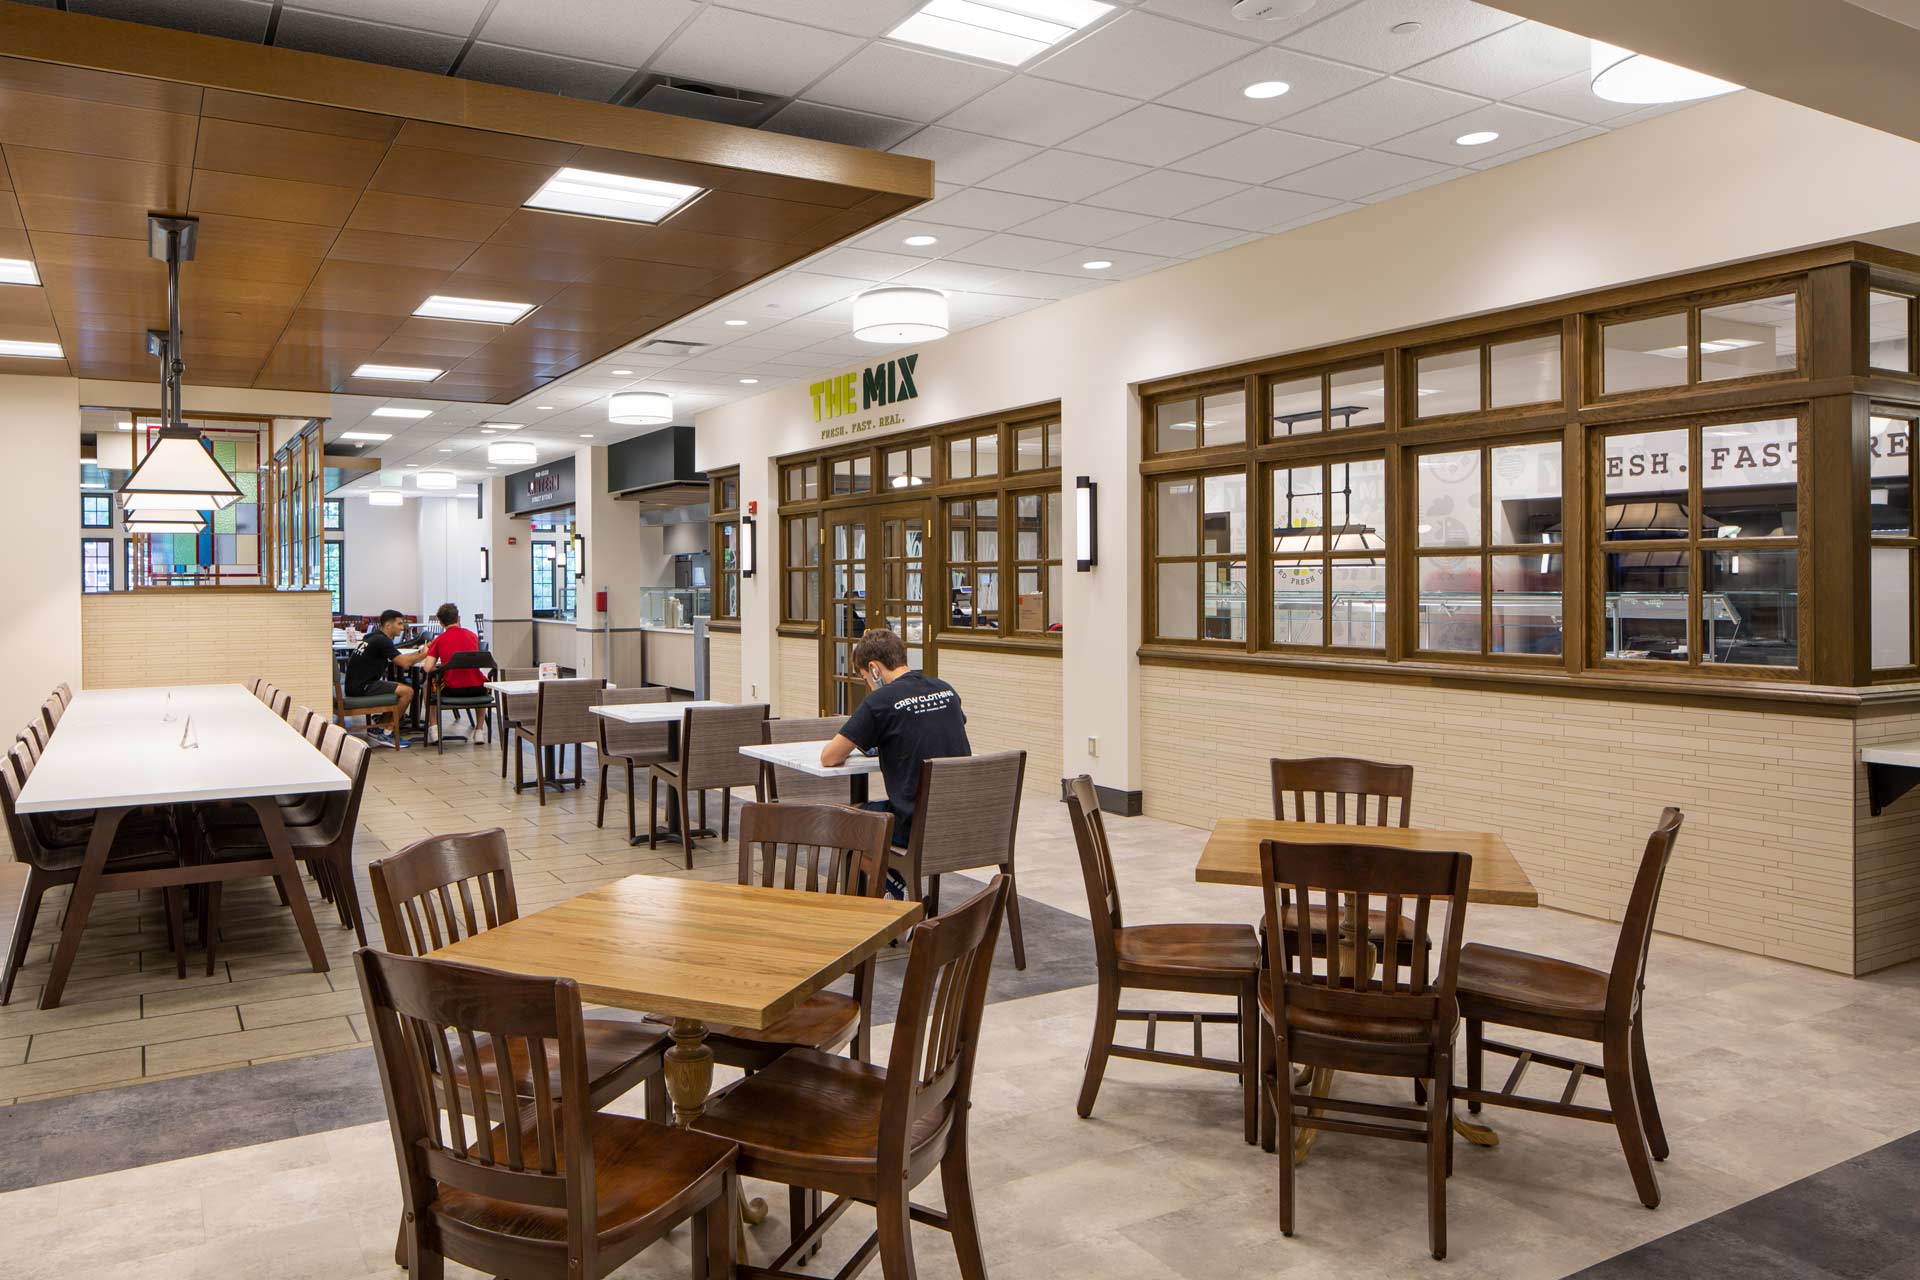 Indiana Memorial Union – Food & Dining Services Renovation